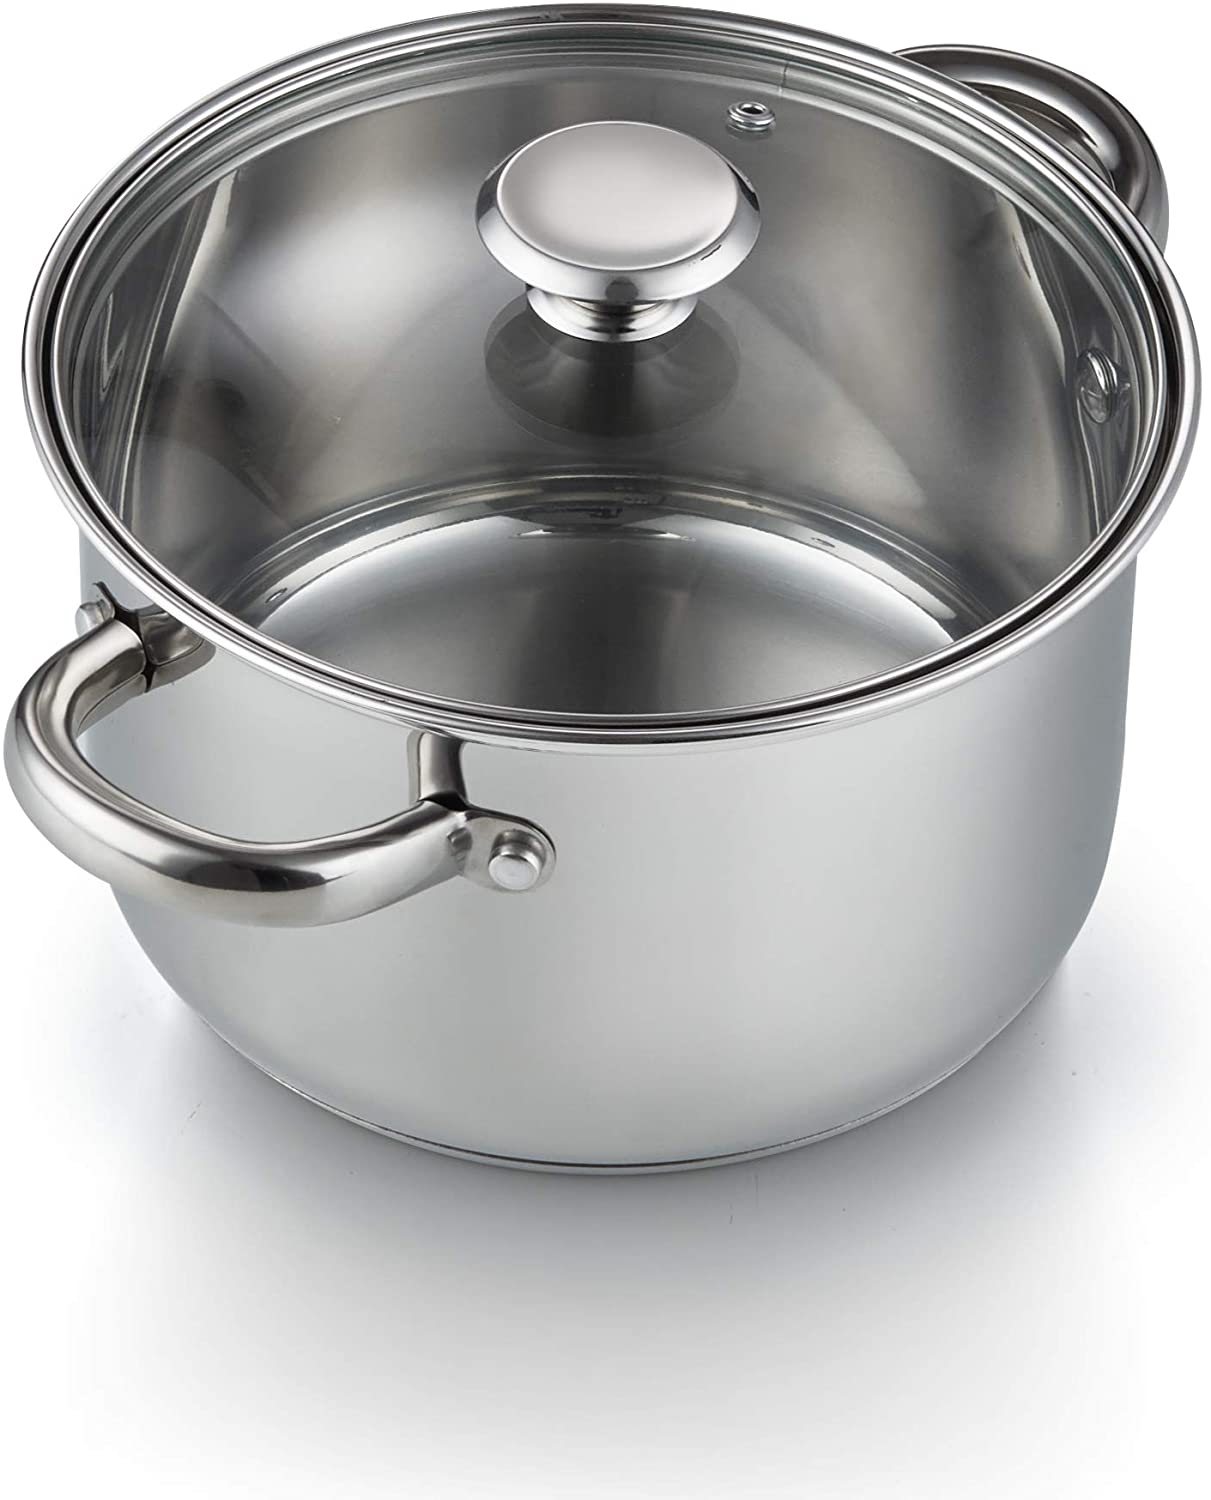 Korkmaz Perla Stainless Steel Steamer Cooking Pot Cooker Double Boiler  Stack Insert with Glass Lid, 4-Quart, a1521